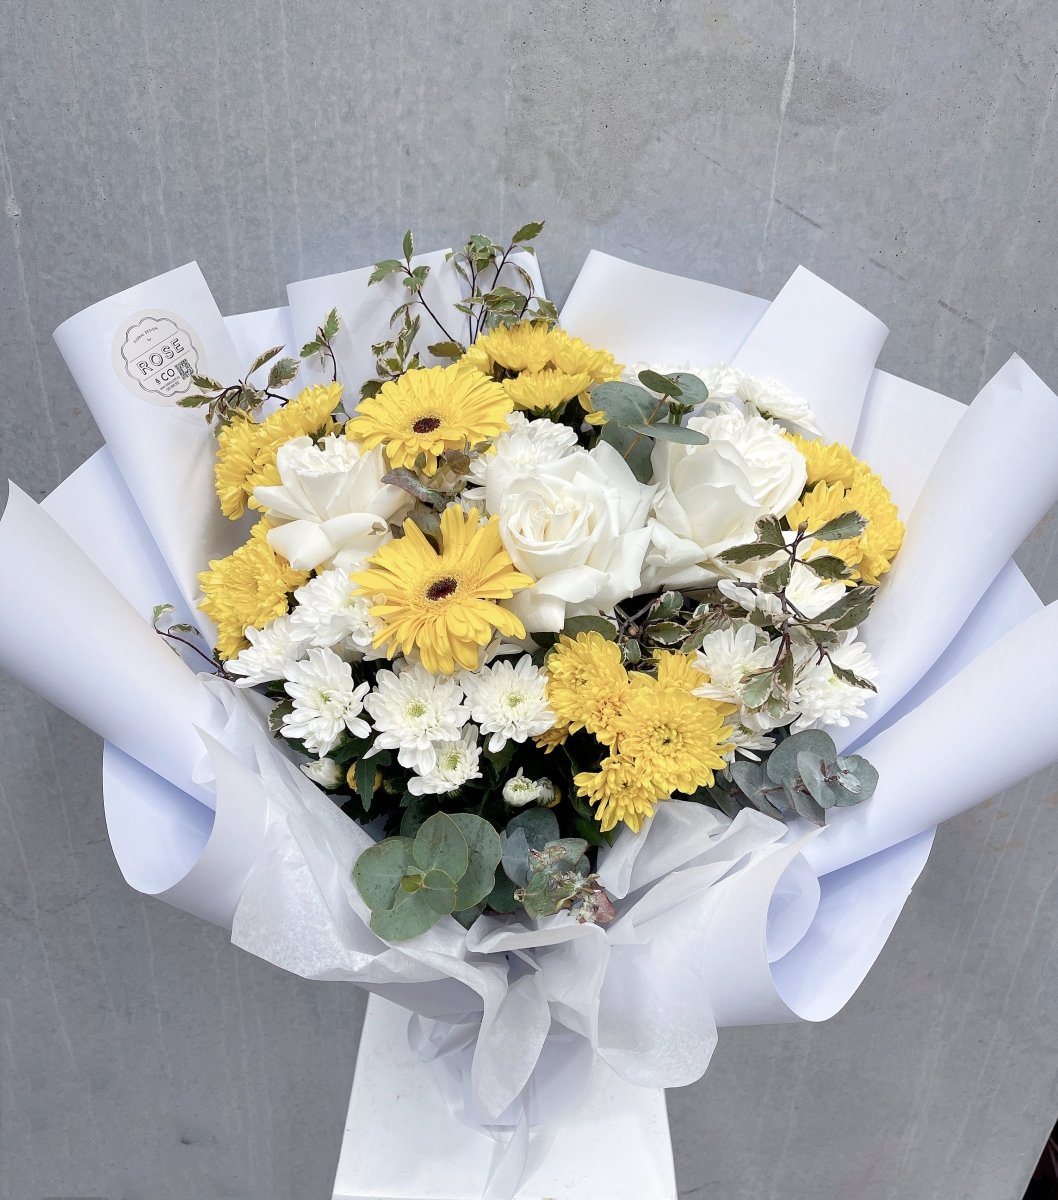 Funeral flower bouquet - ROSE &amp; CO